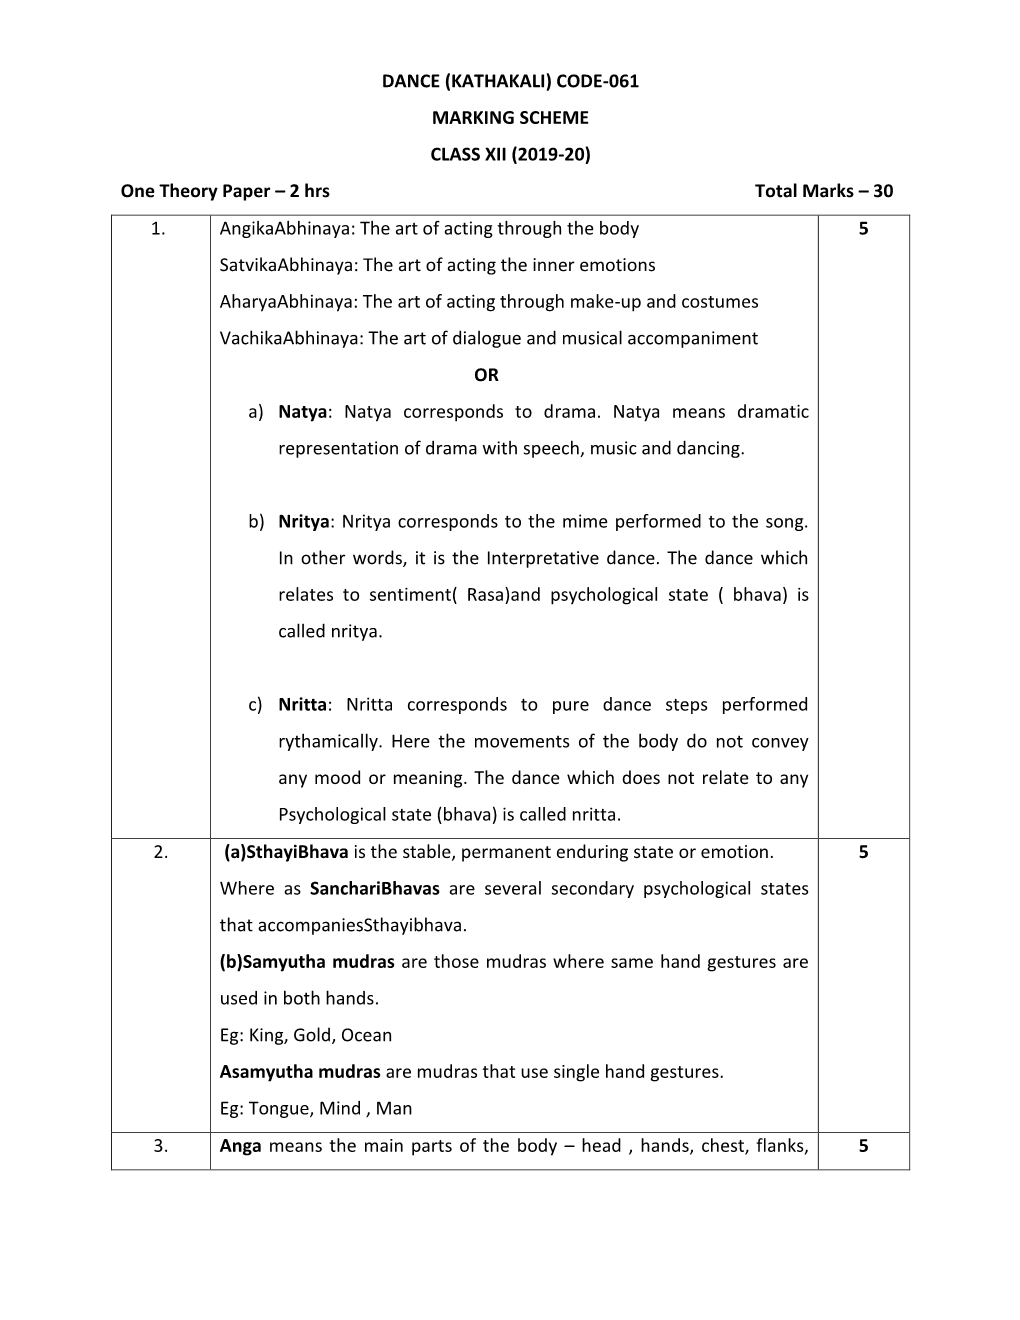 KATHAKALI) CODE-061 MARKING SCHEME CLASS XII (2019-20) One Theory Paper – 2 Hrs Total Marks – 30 1